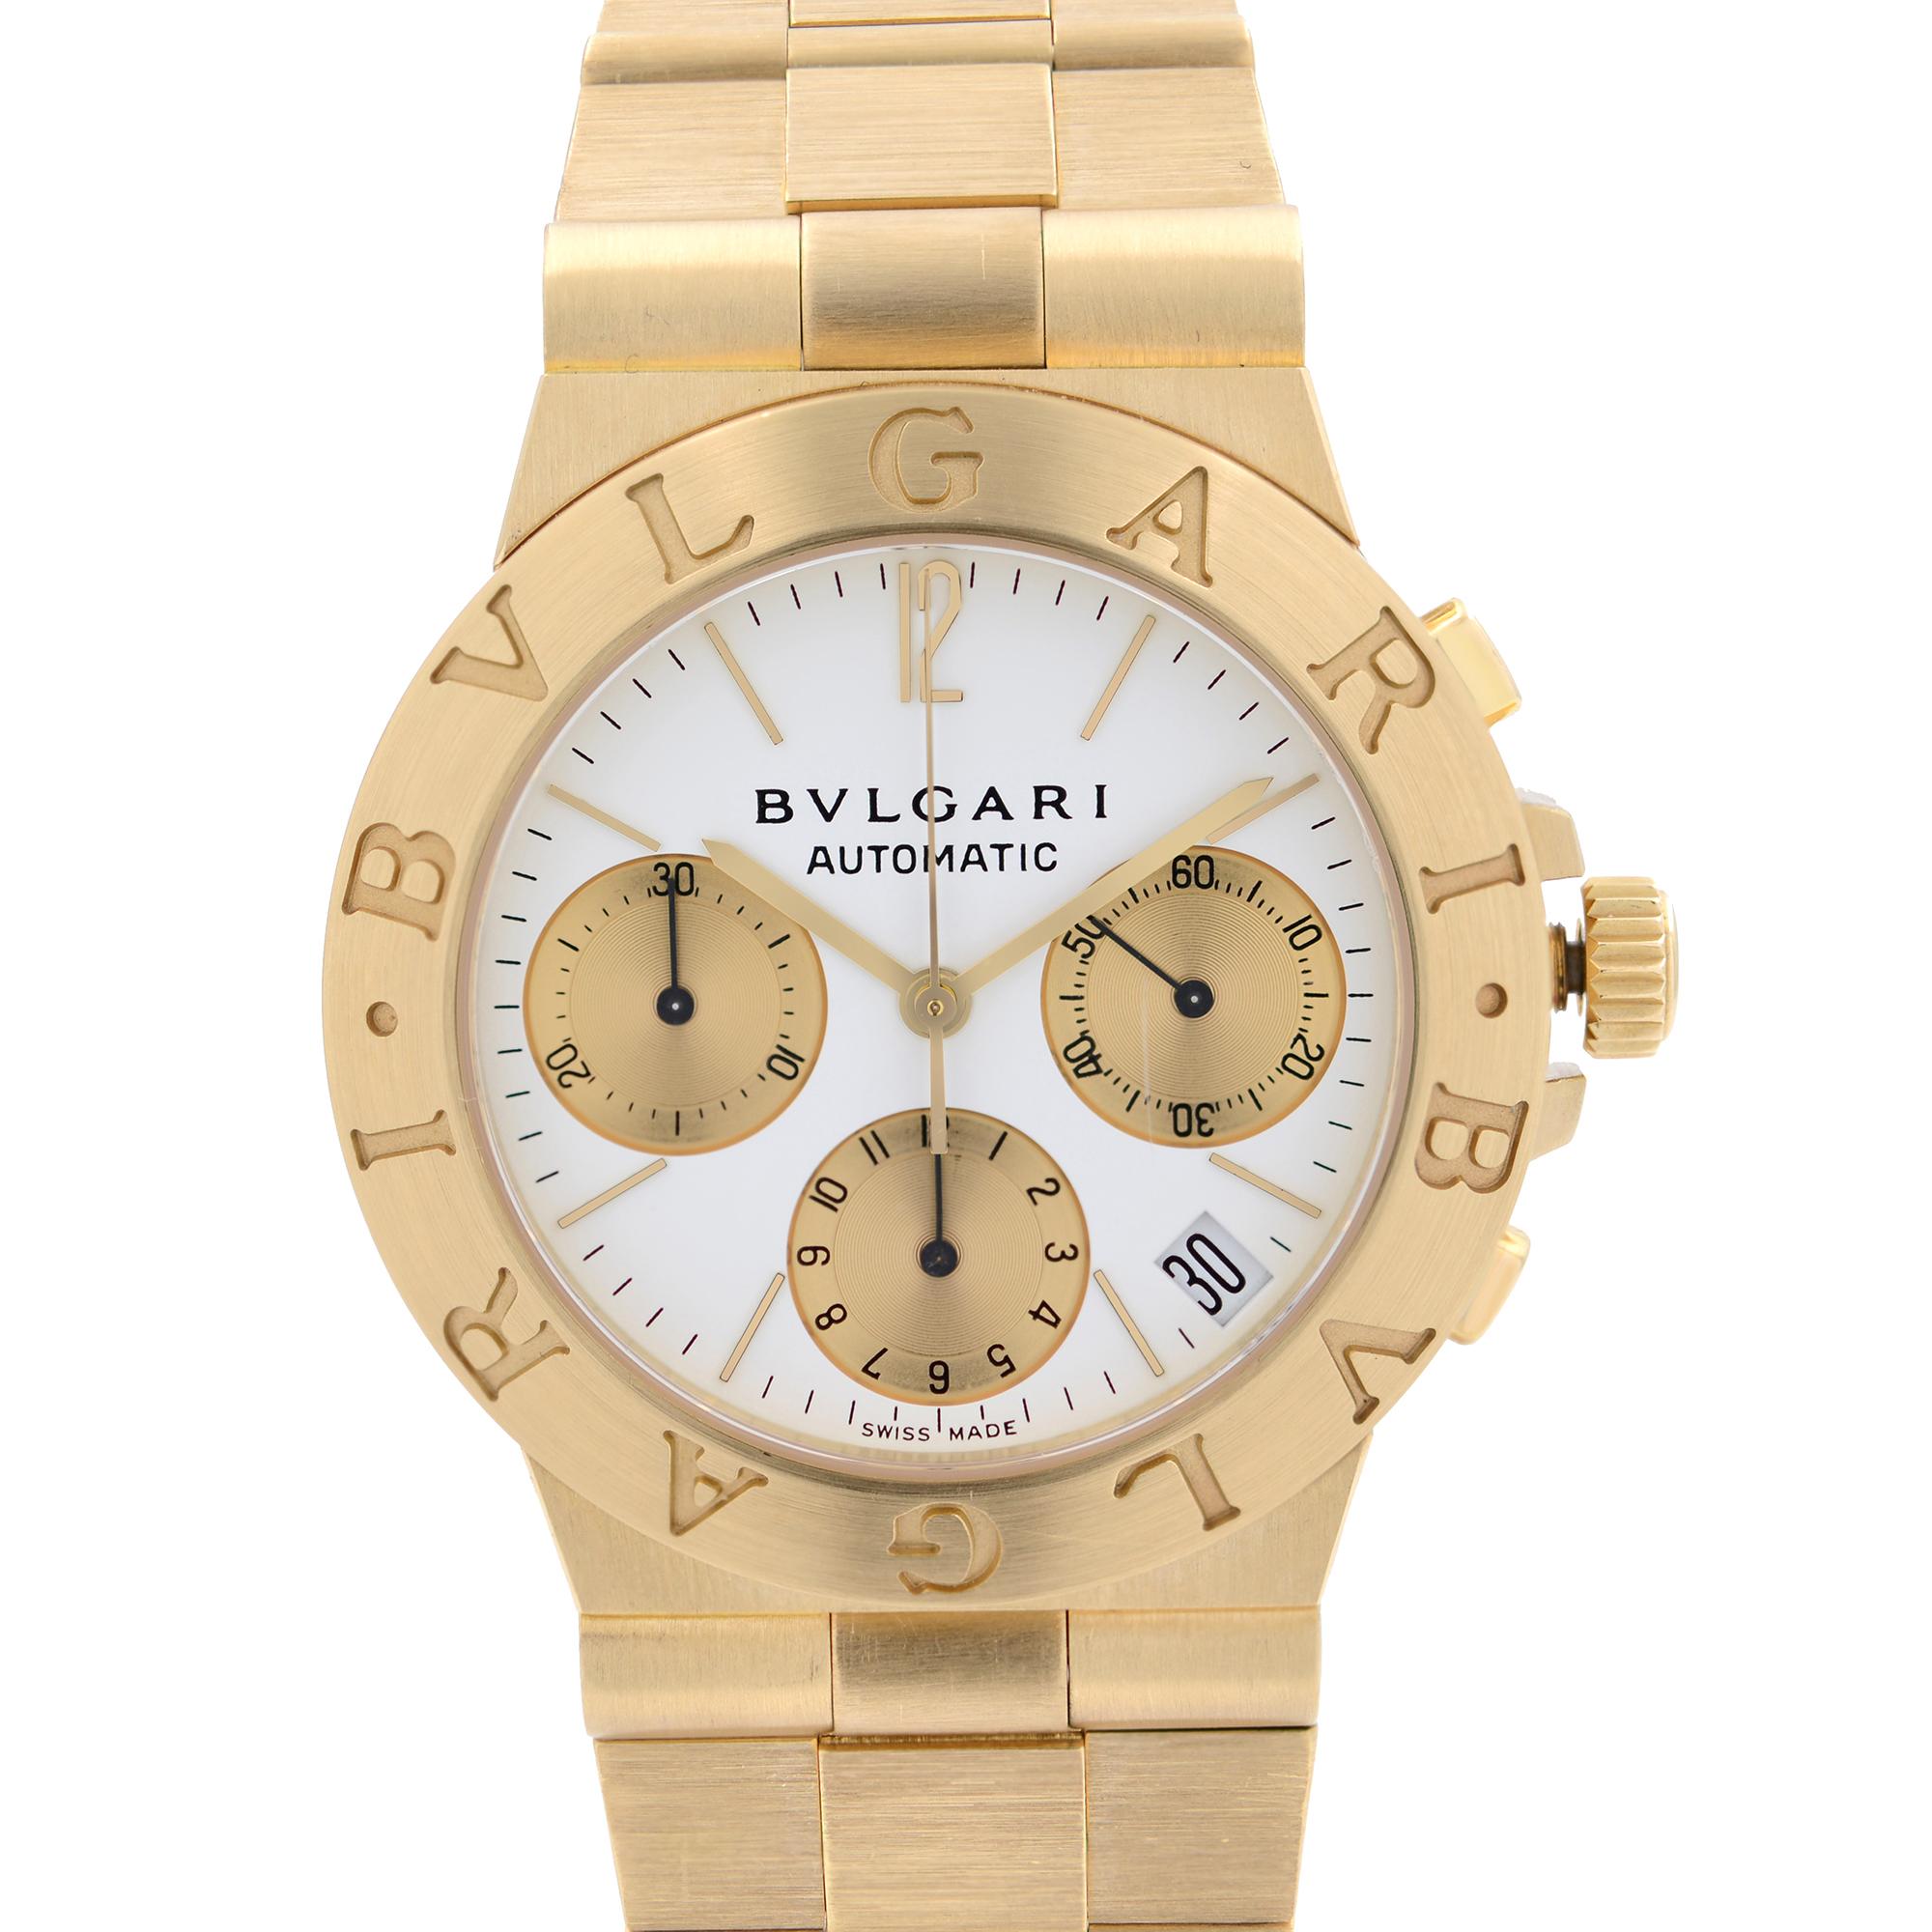 Pre Owned Bvlgari Diagono 36mm Chronograph 18K Yellow Gold White Dial Men's Watch CH 35 G. This Beautiful Timepiece is Powered by Mechanical (Automatic) Movement And Features: Round 18k Yellow Gold Case & Bracelet, Fixed 18k Yellow Gold Bezel, White